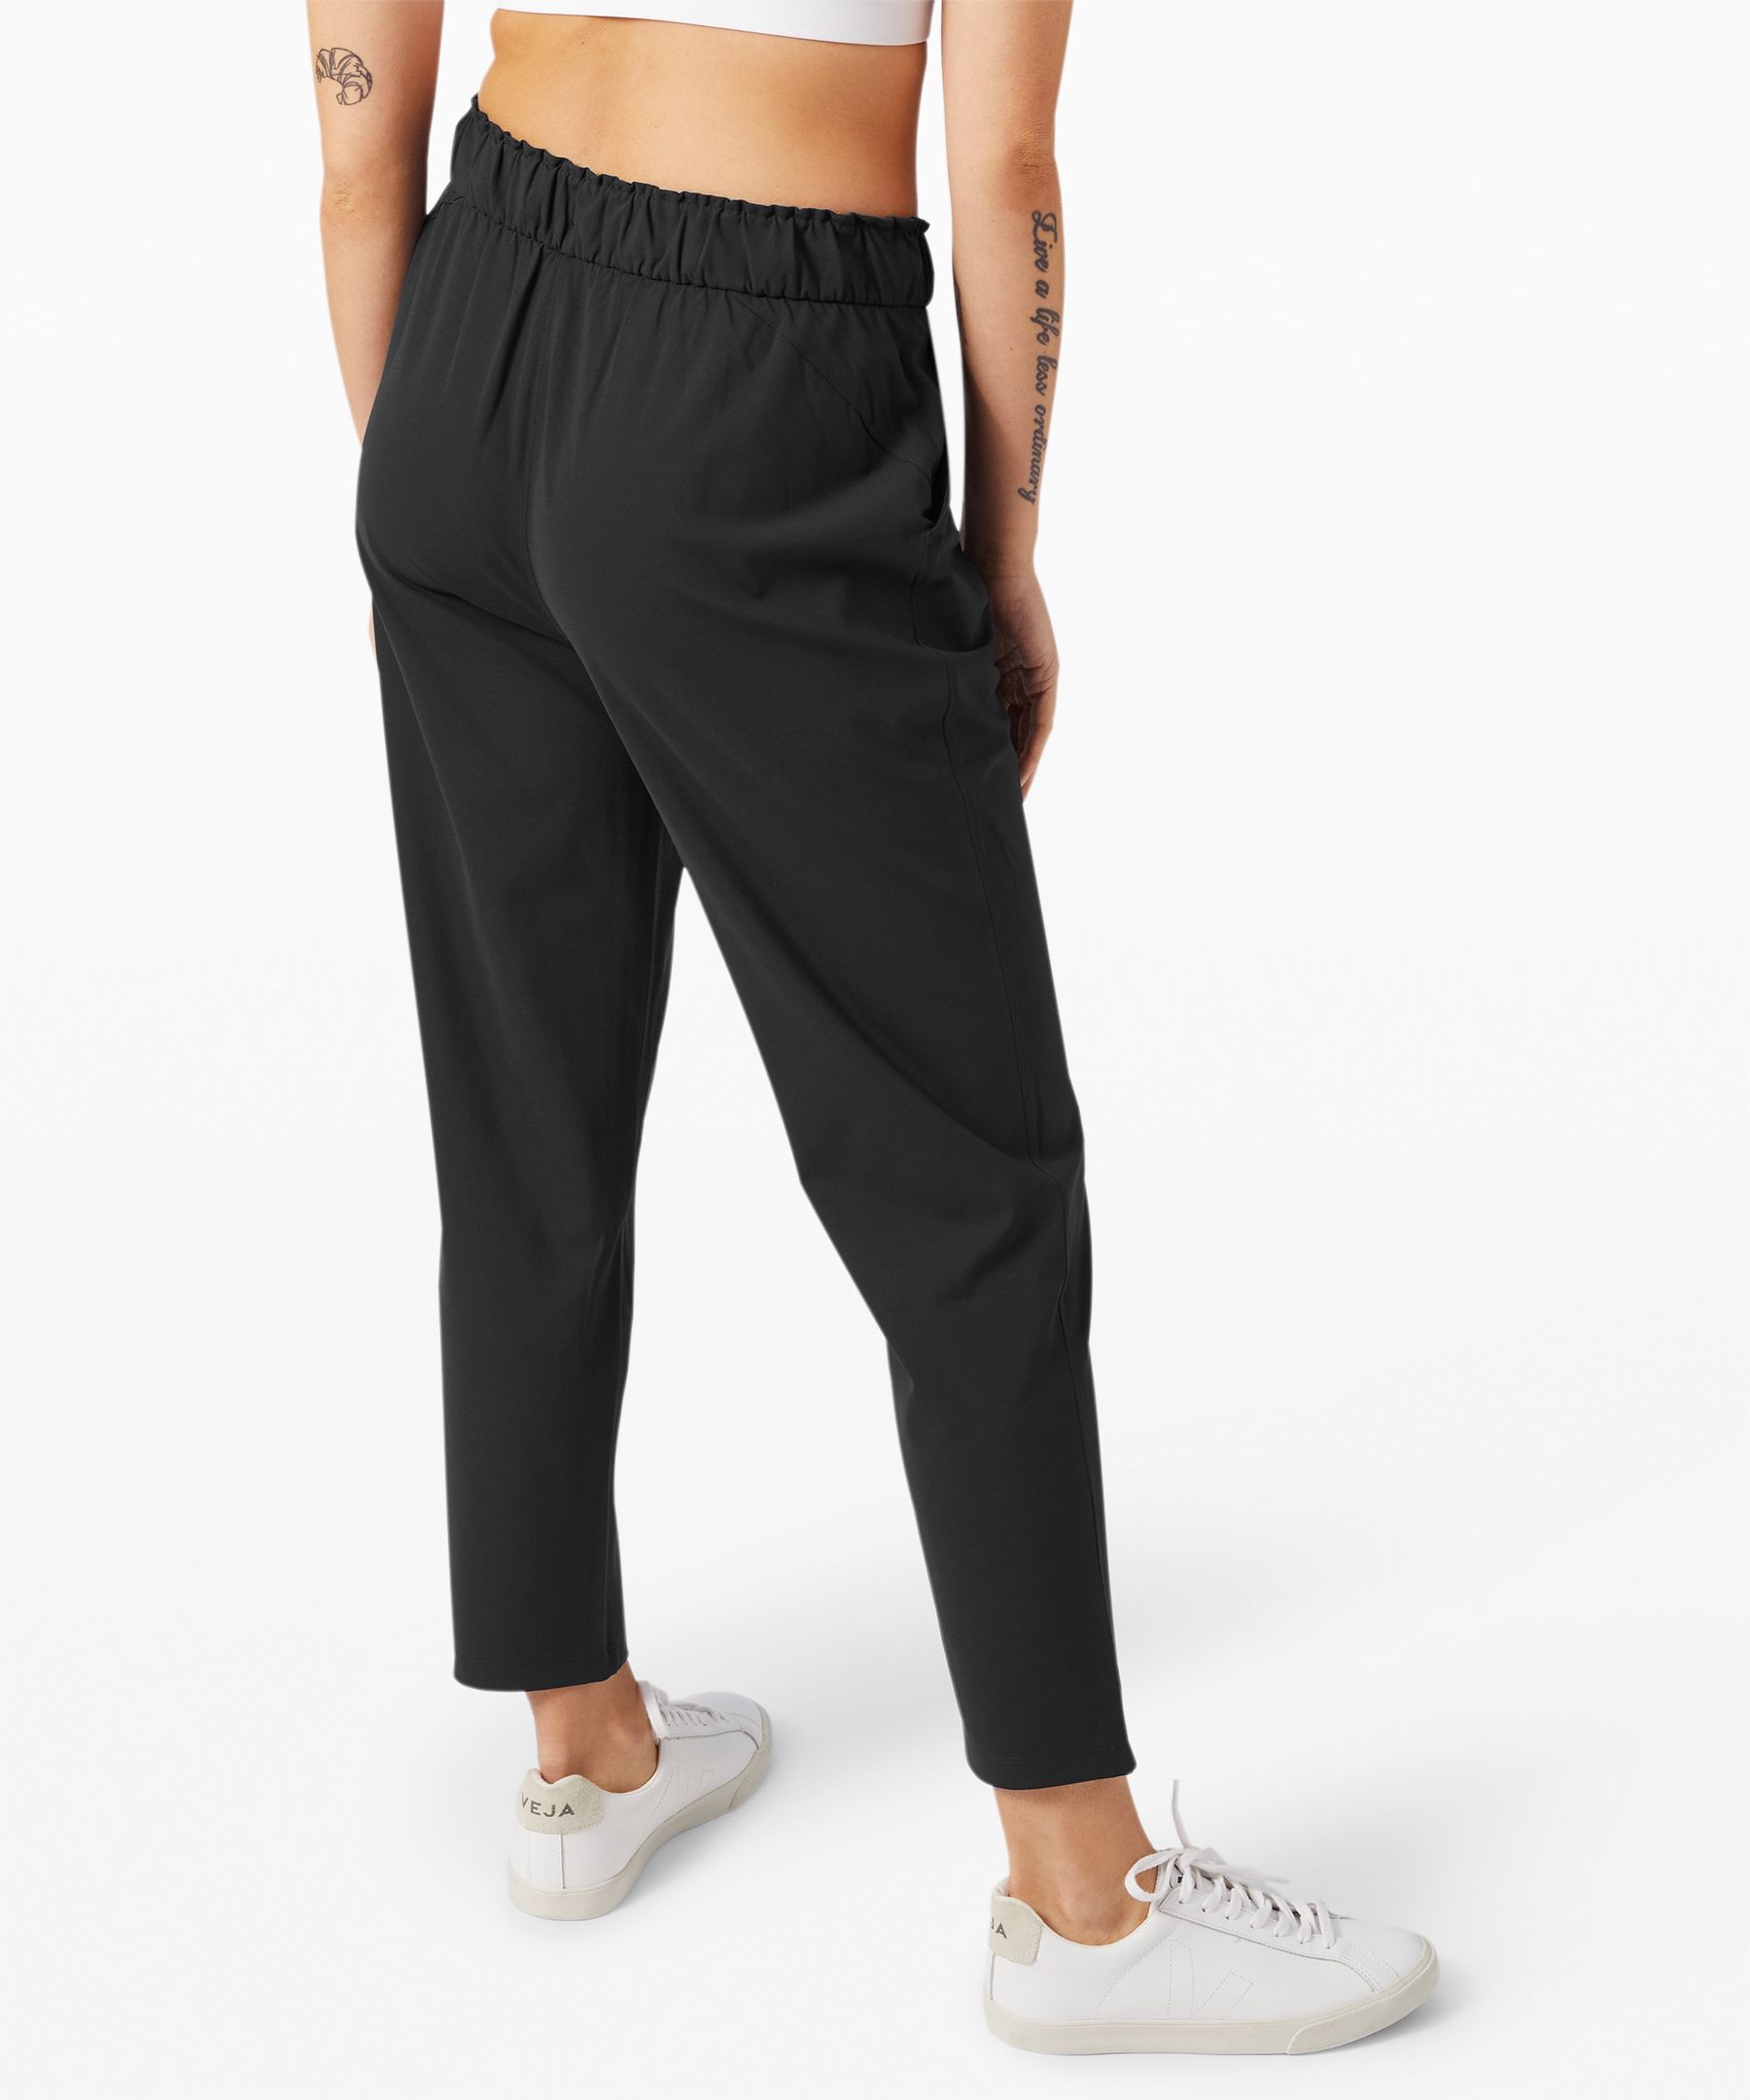 Lululemon Stretch High-rise Pants 7/8 Length In Graphite Grey